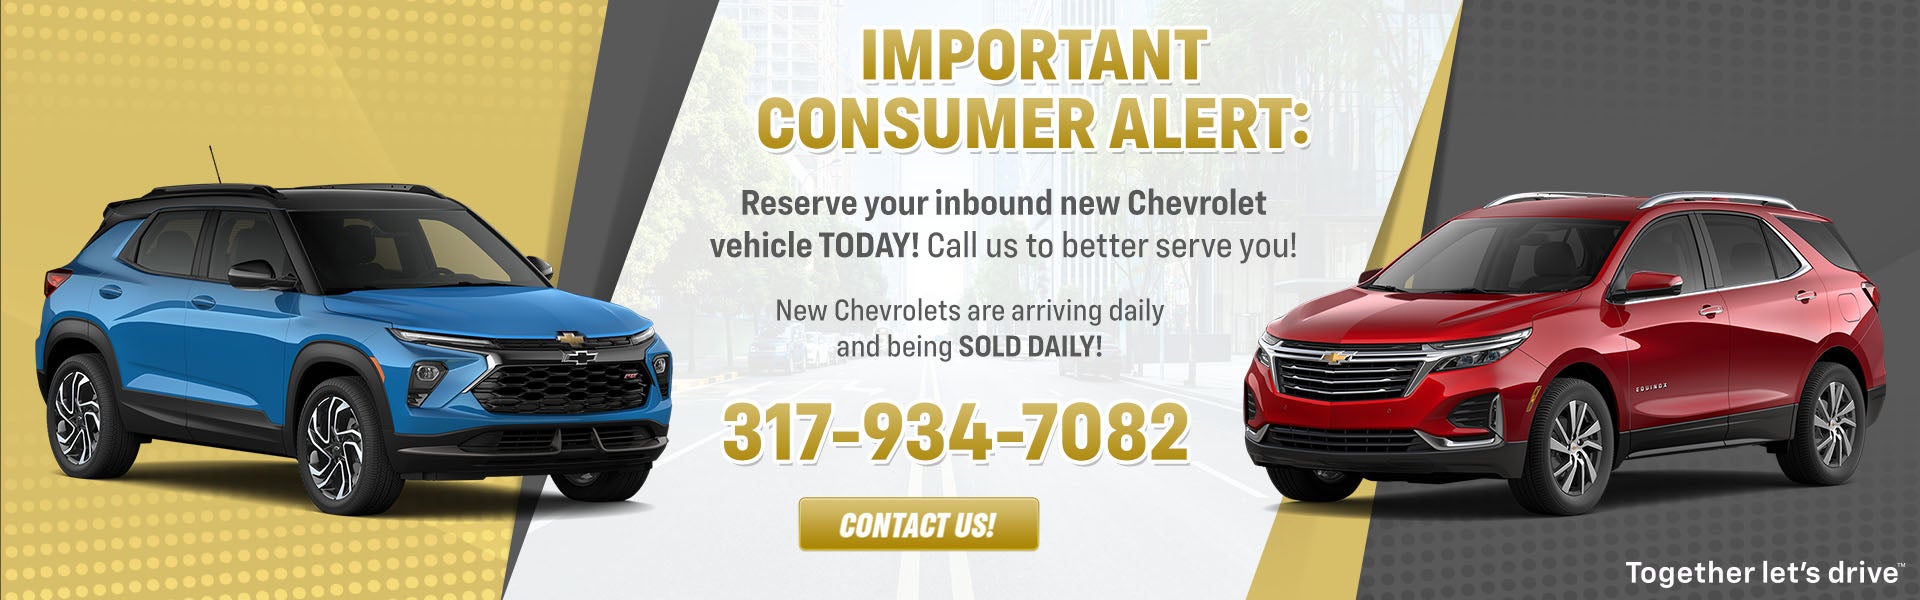 New Chevrolets Arriving Daily